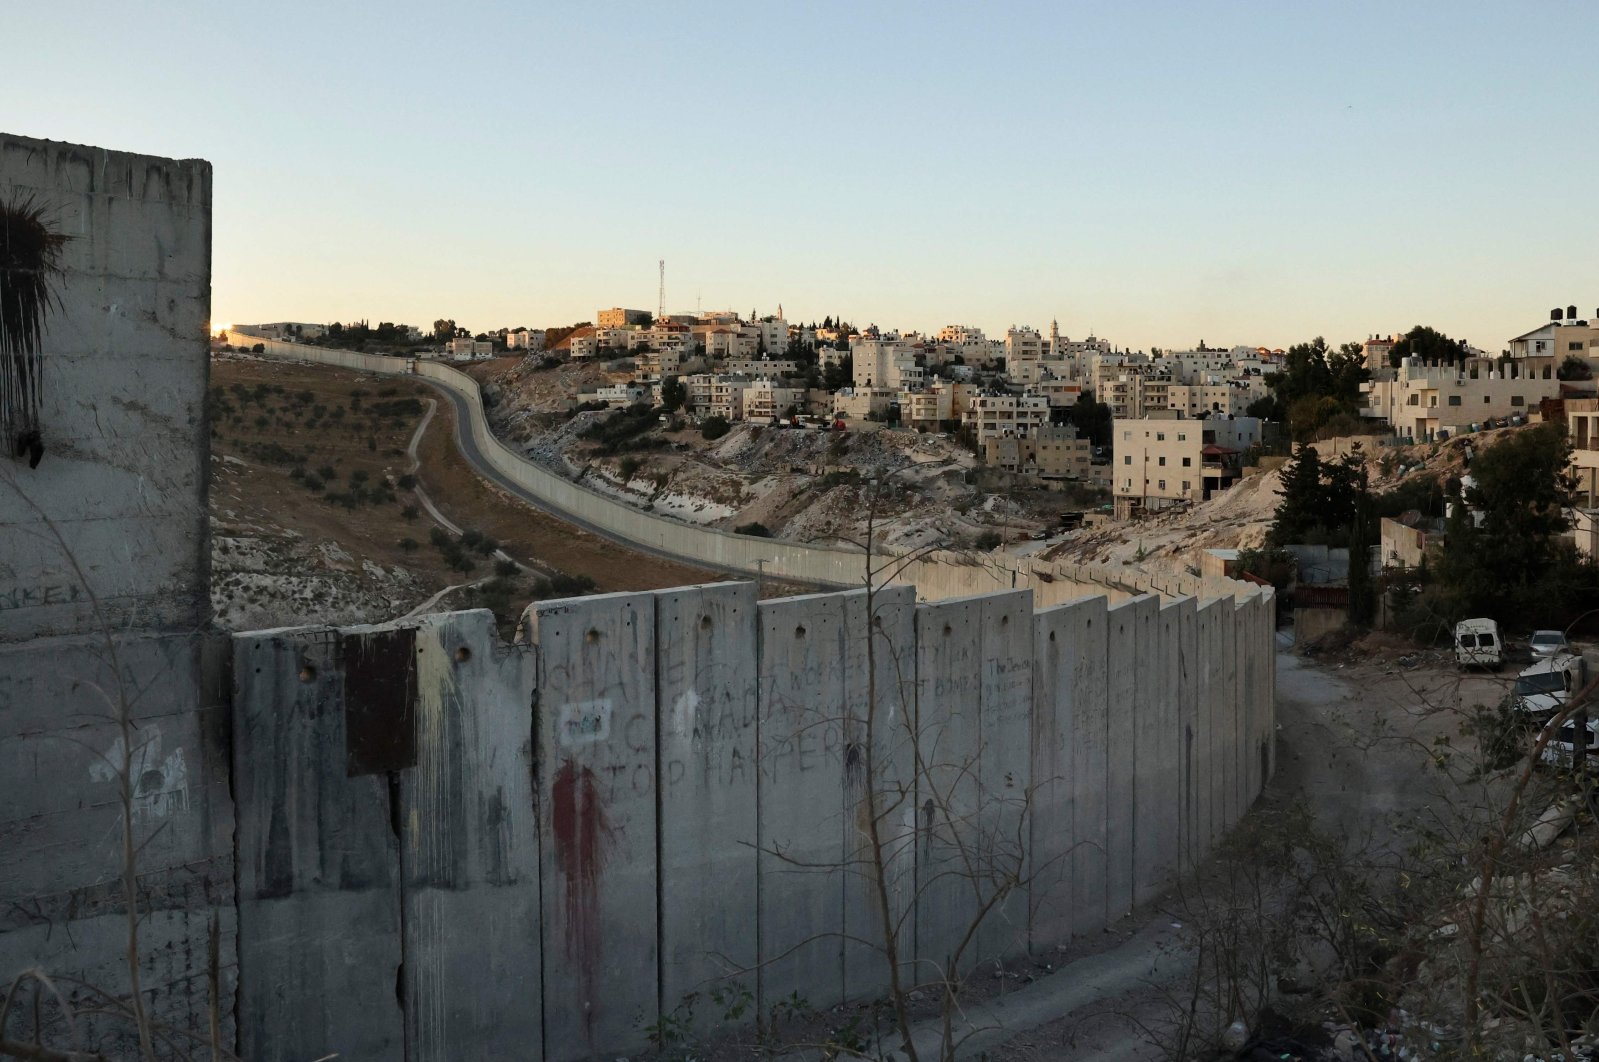 A picture shows Israel's separation barrier cutting through the occupied West Bank town of Abu Dis on the outskirts of Jerusalem, Palestine, Nov. 8, 2021. (Photo by HAZEM BADER / AFP)